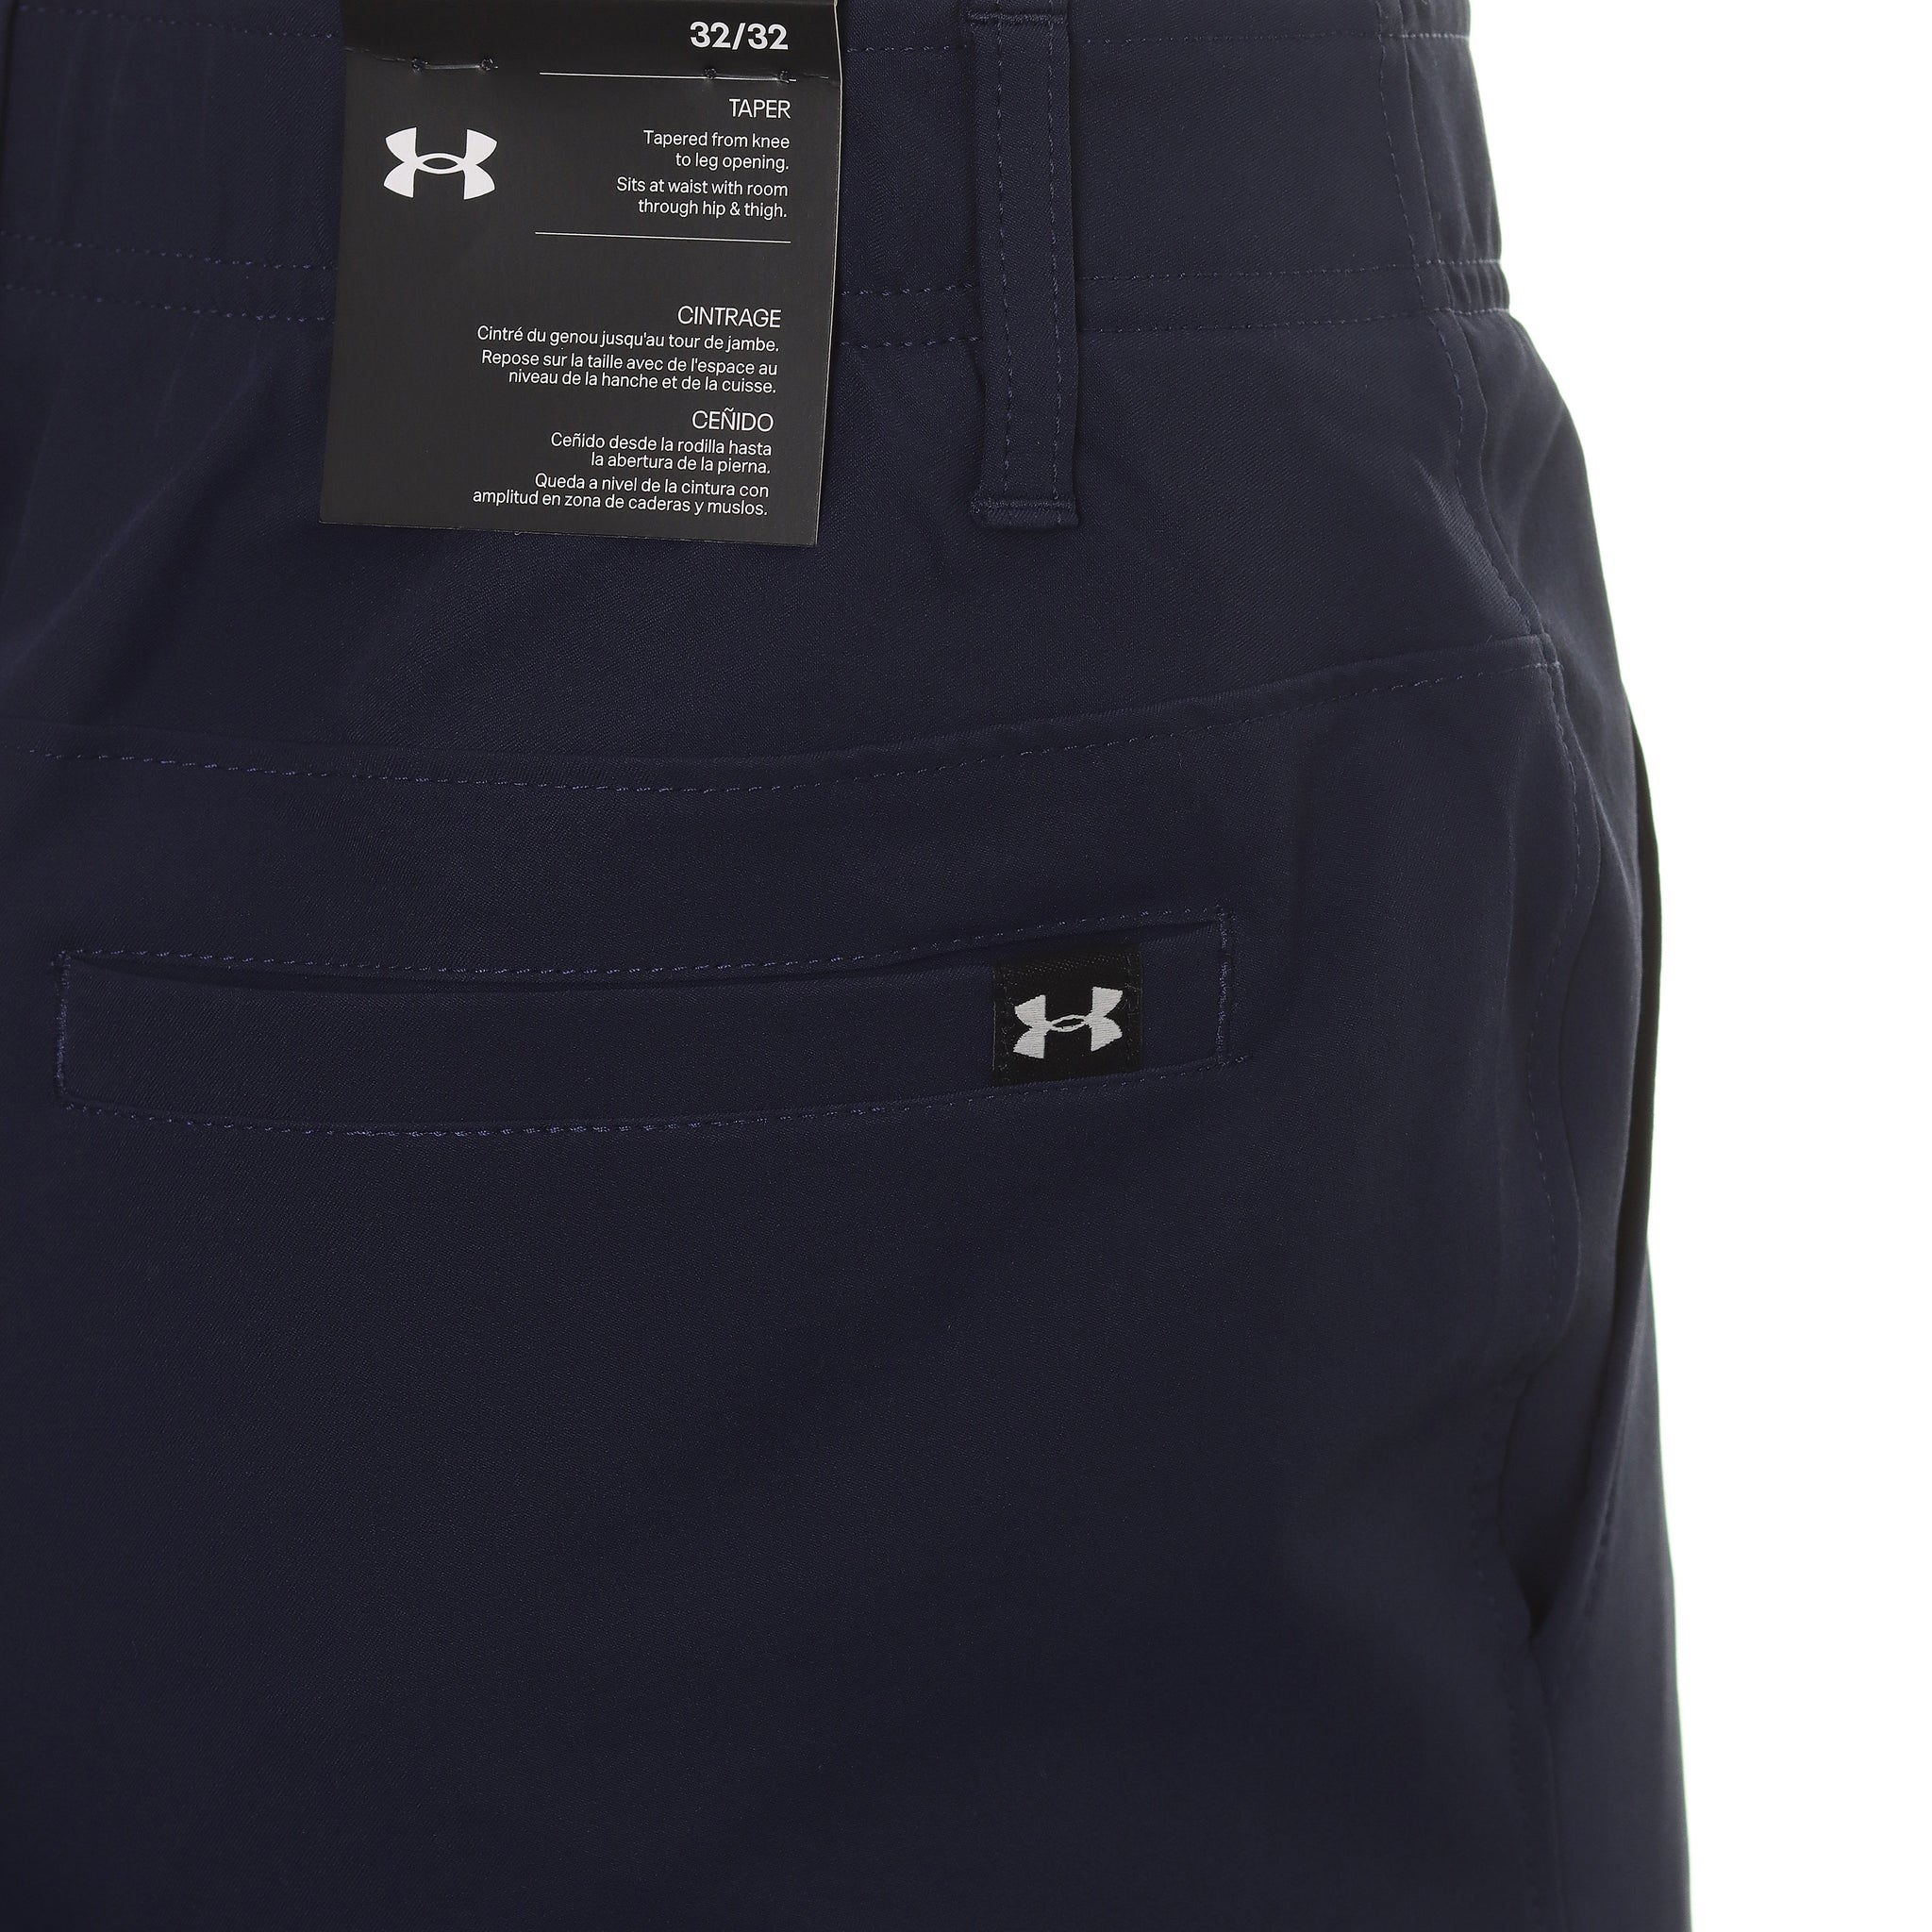 Under Armour Golf UA Drive Pants 1364407 Midnight Navy 410 & Function18